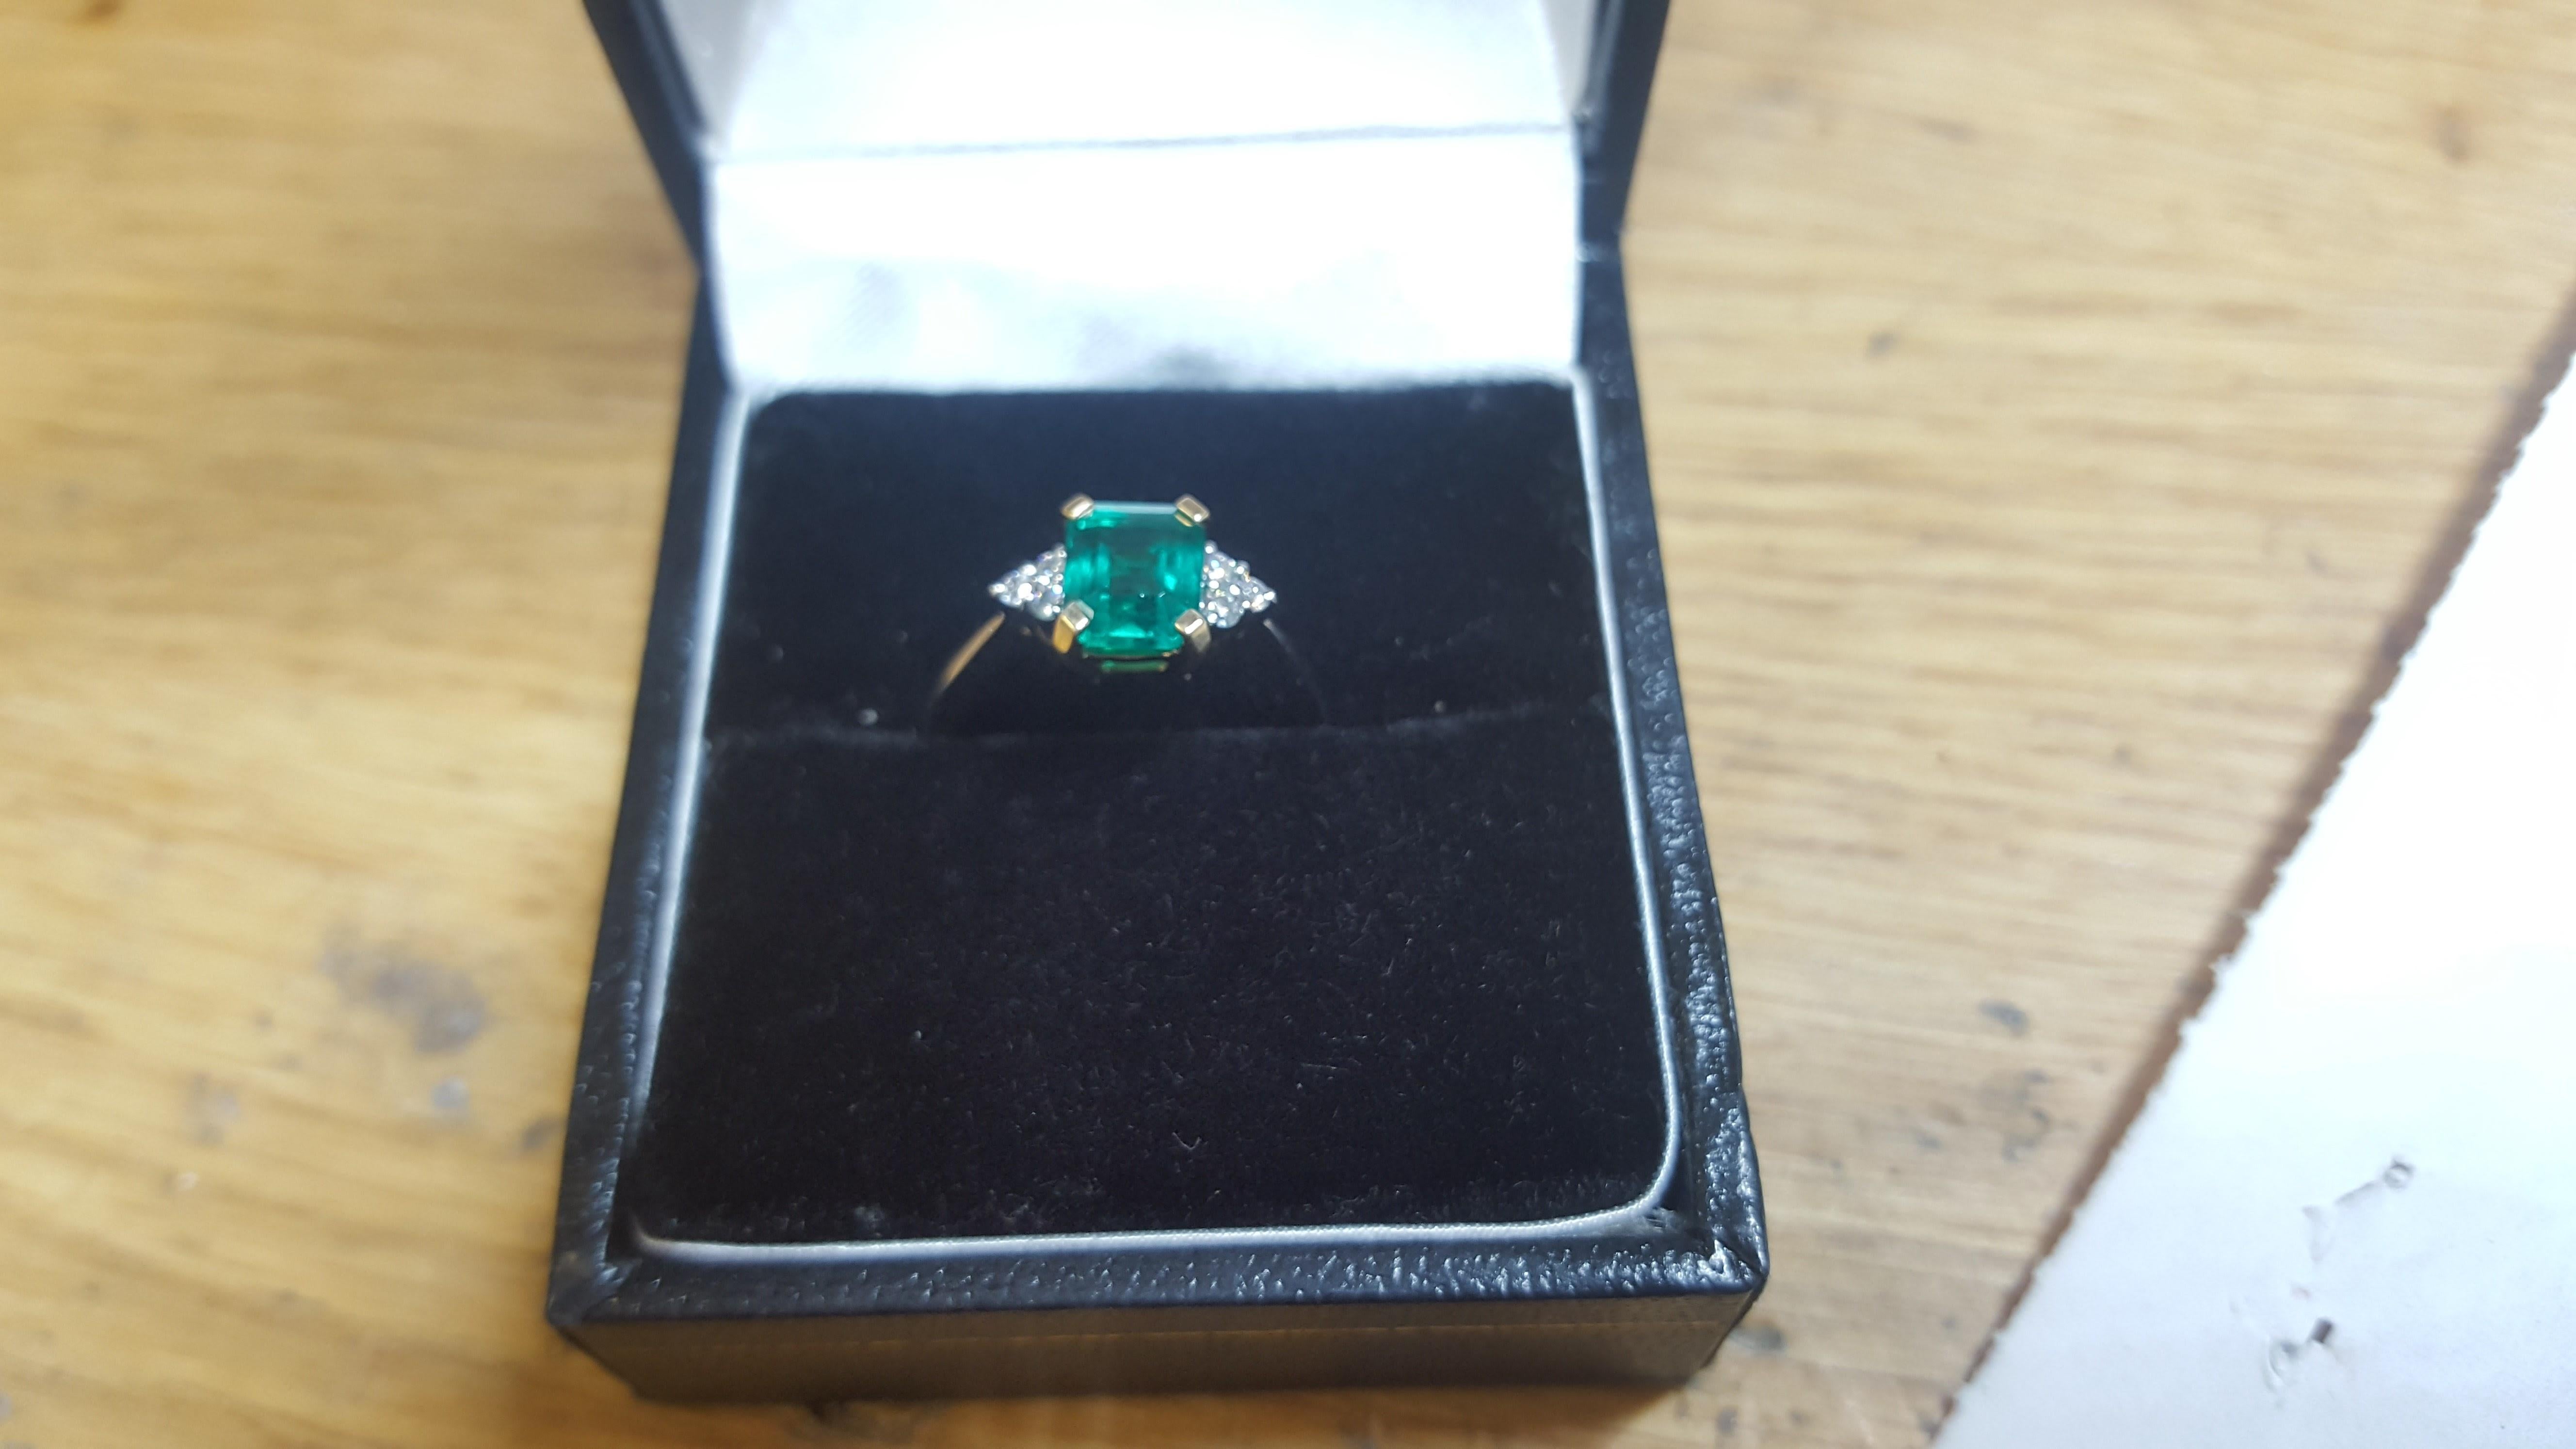 This is a recent example of a hand crafted 1 carat, Muzo Colombian emerald and diamond engagement ring set in platinum 950. This is perfect as a special cocktail ring gift or for a proposal.

We can create bespoke pieces such as this in